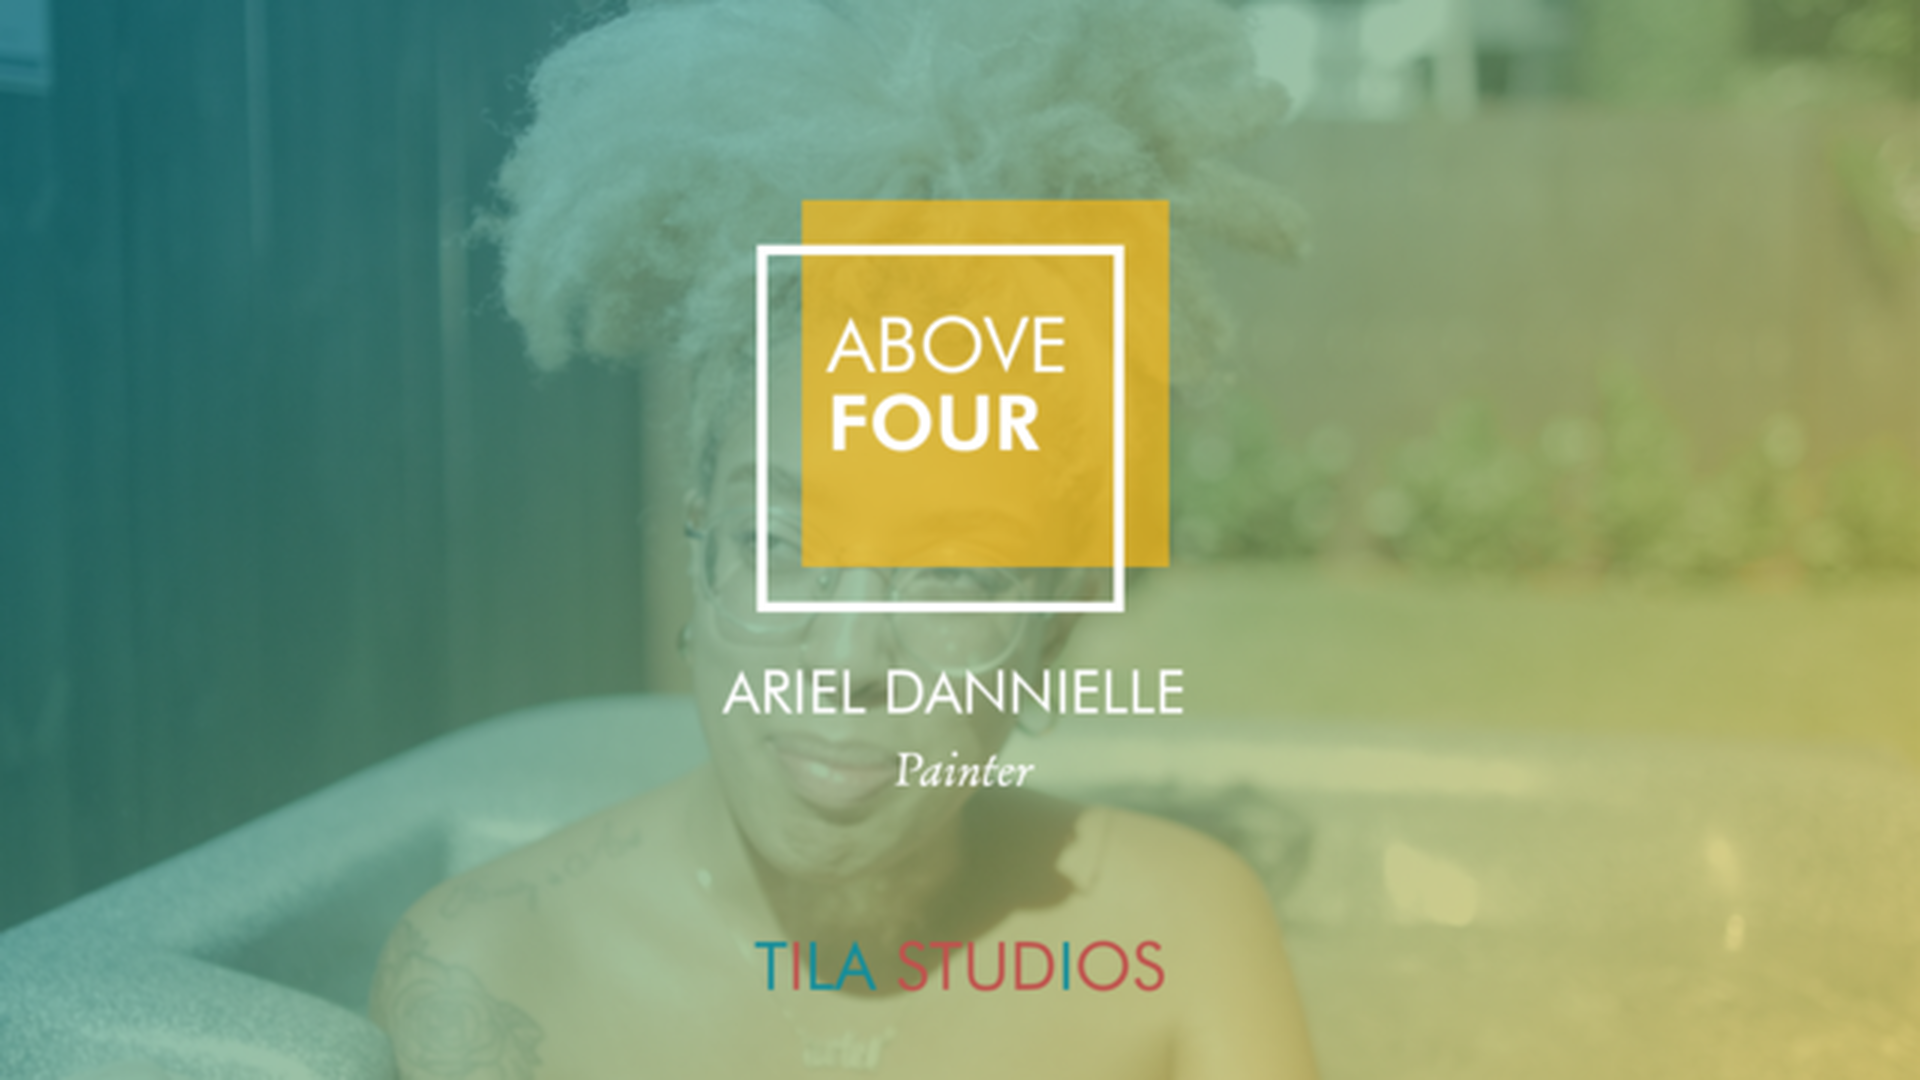 Above Four: Ariel Dannielle on Imagery, Presentation, and being a Lady vs. an Artist